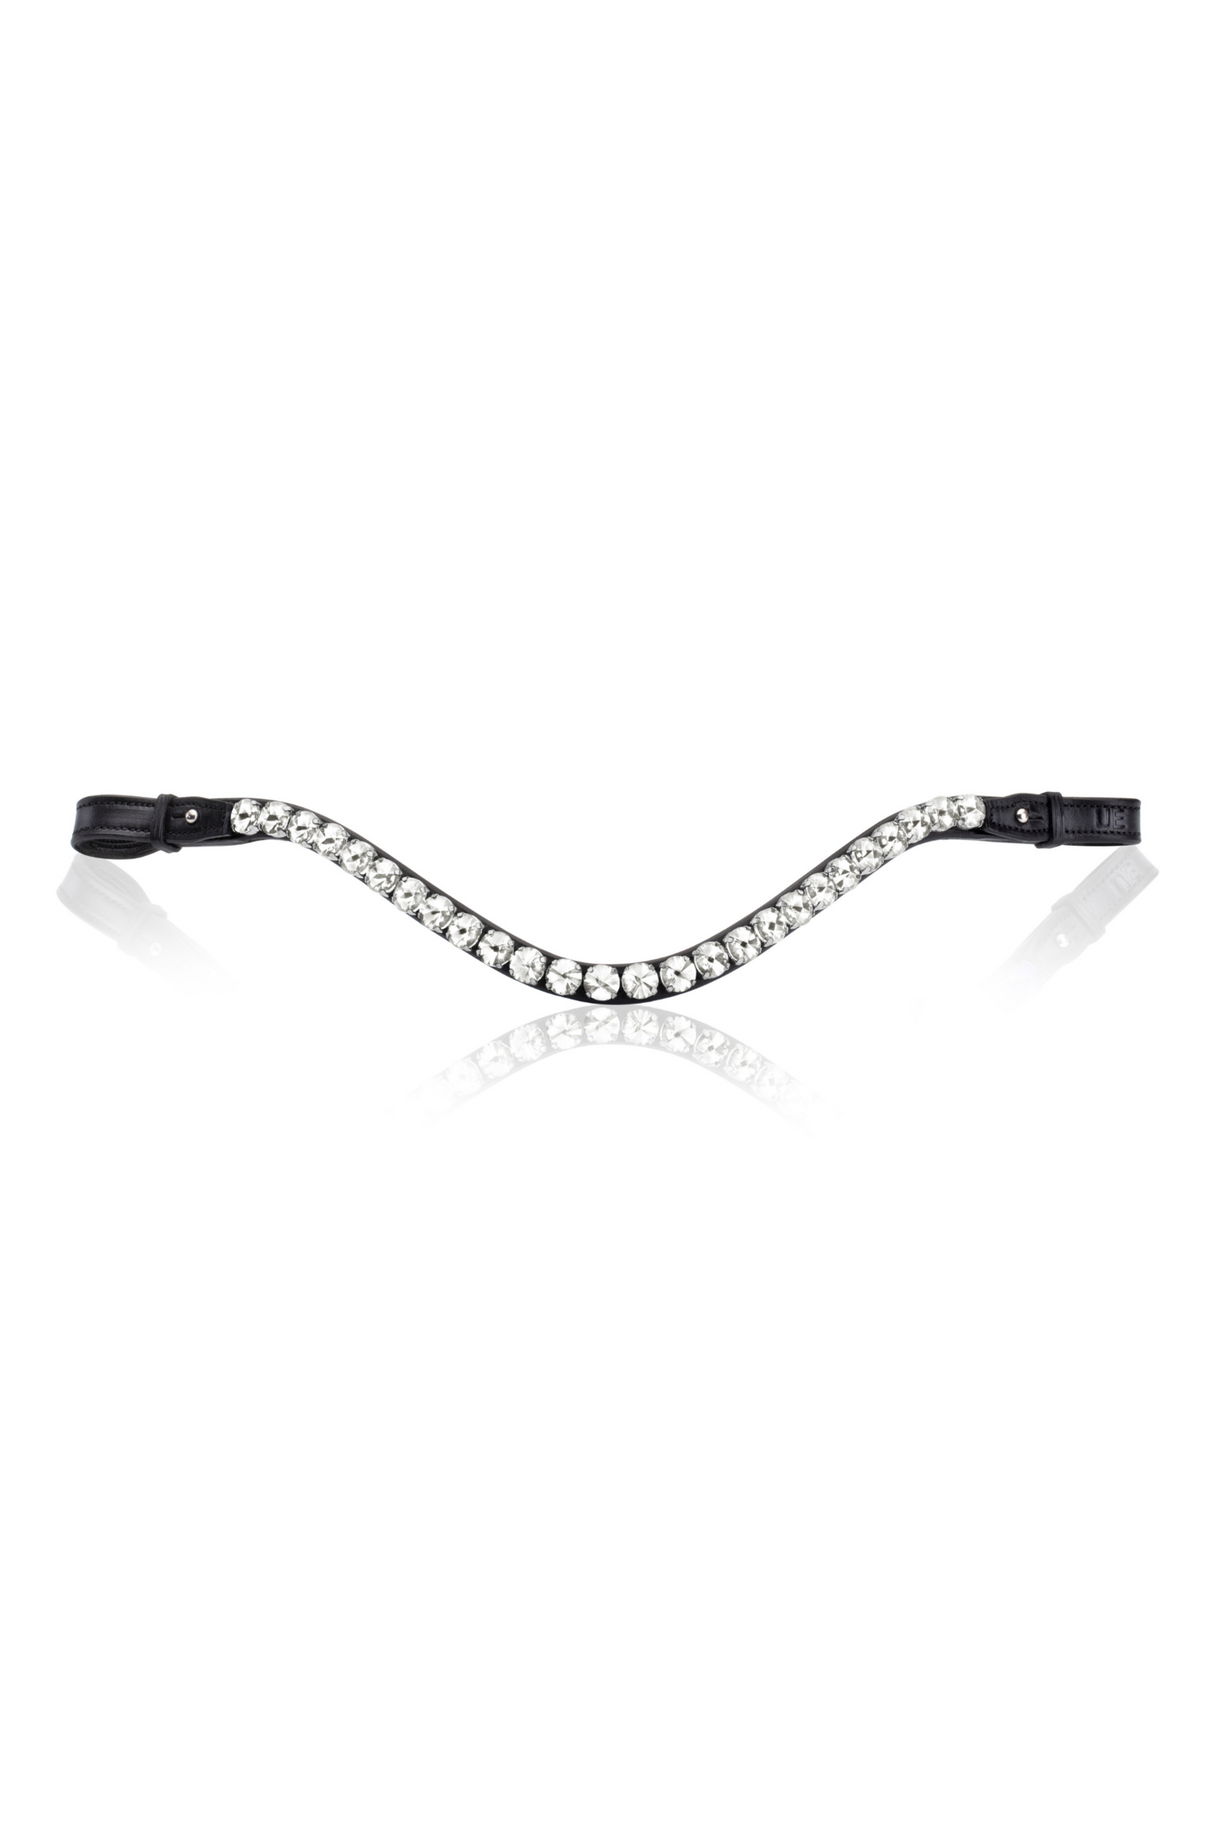 IN STOCK - Utzon Equestrian Empire Browband Clear